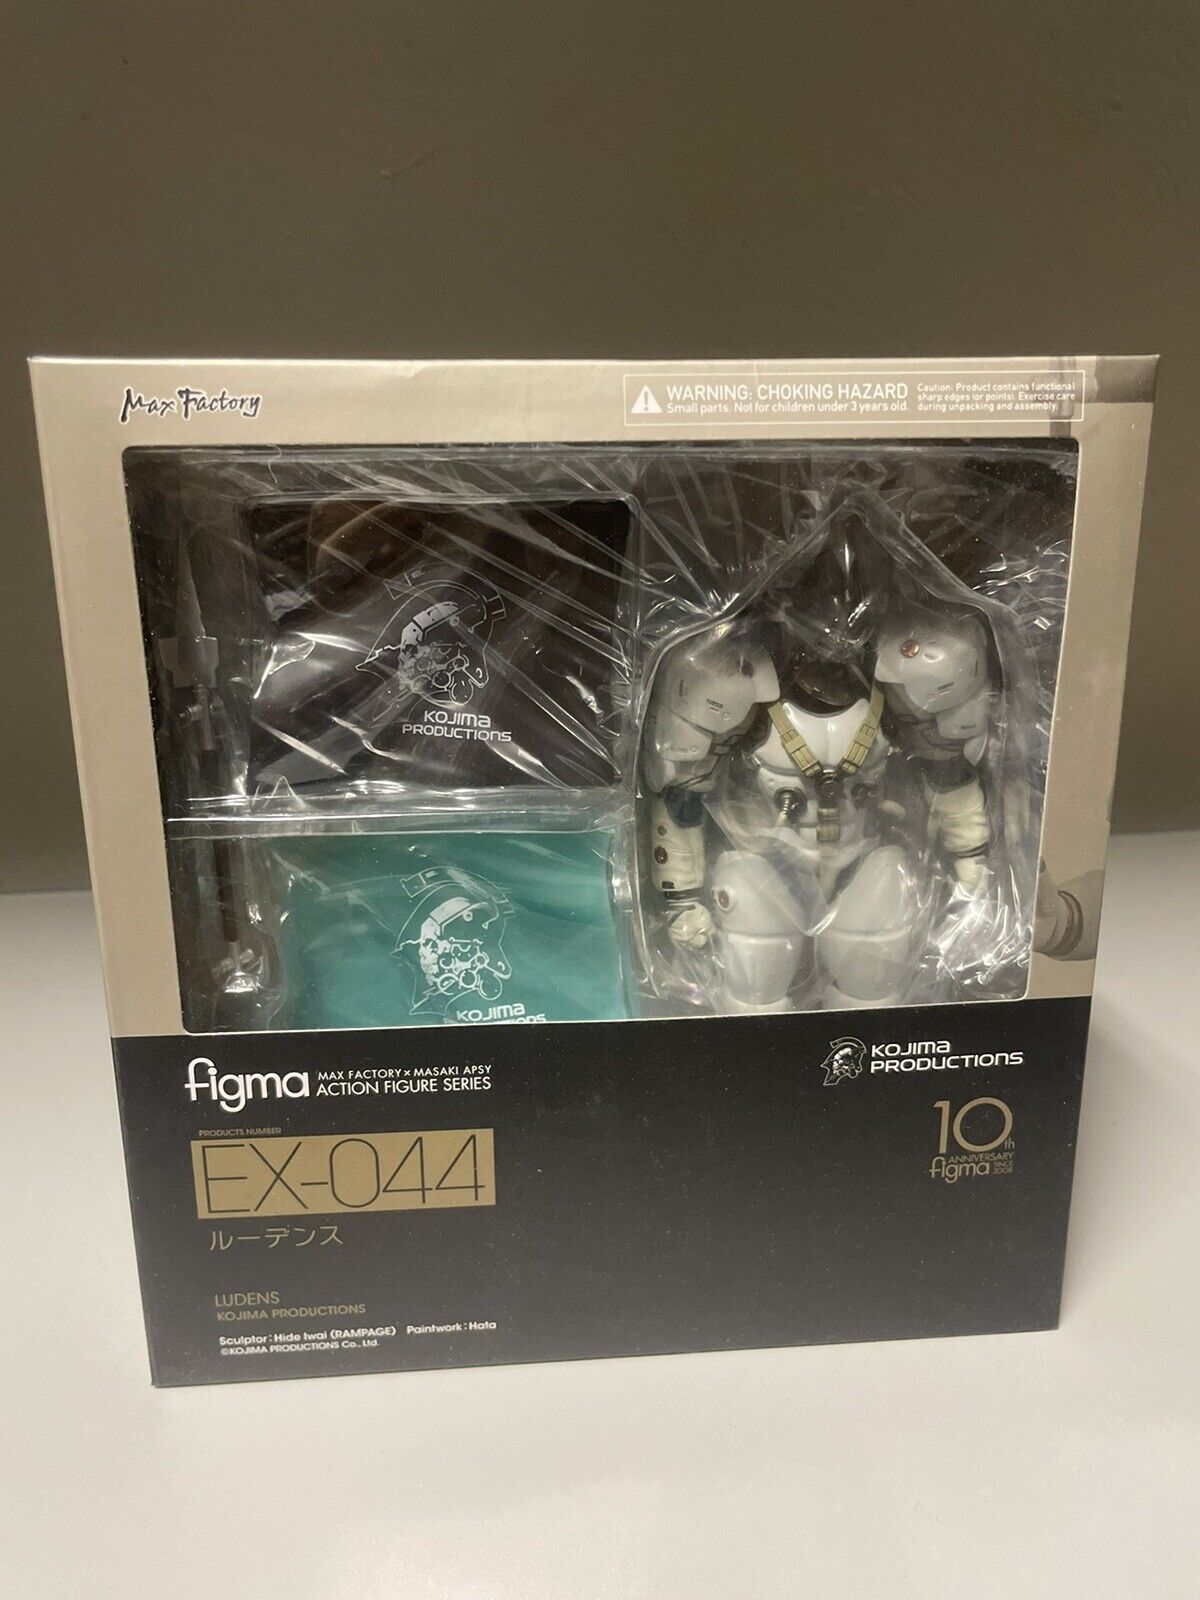 Max Factory Figma EX-044 Ludens Painted Figure Kojima Productions BRAND NEW